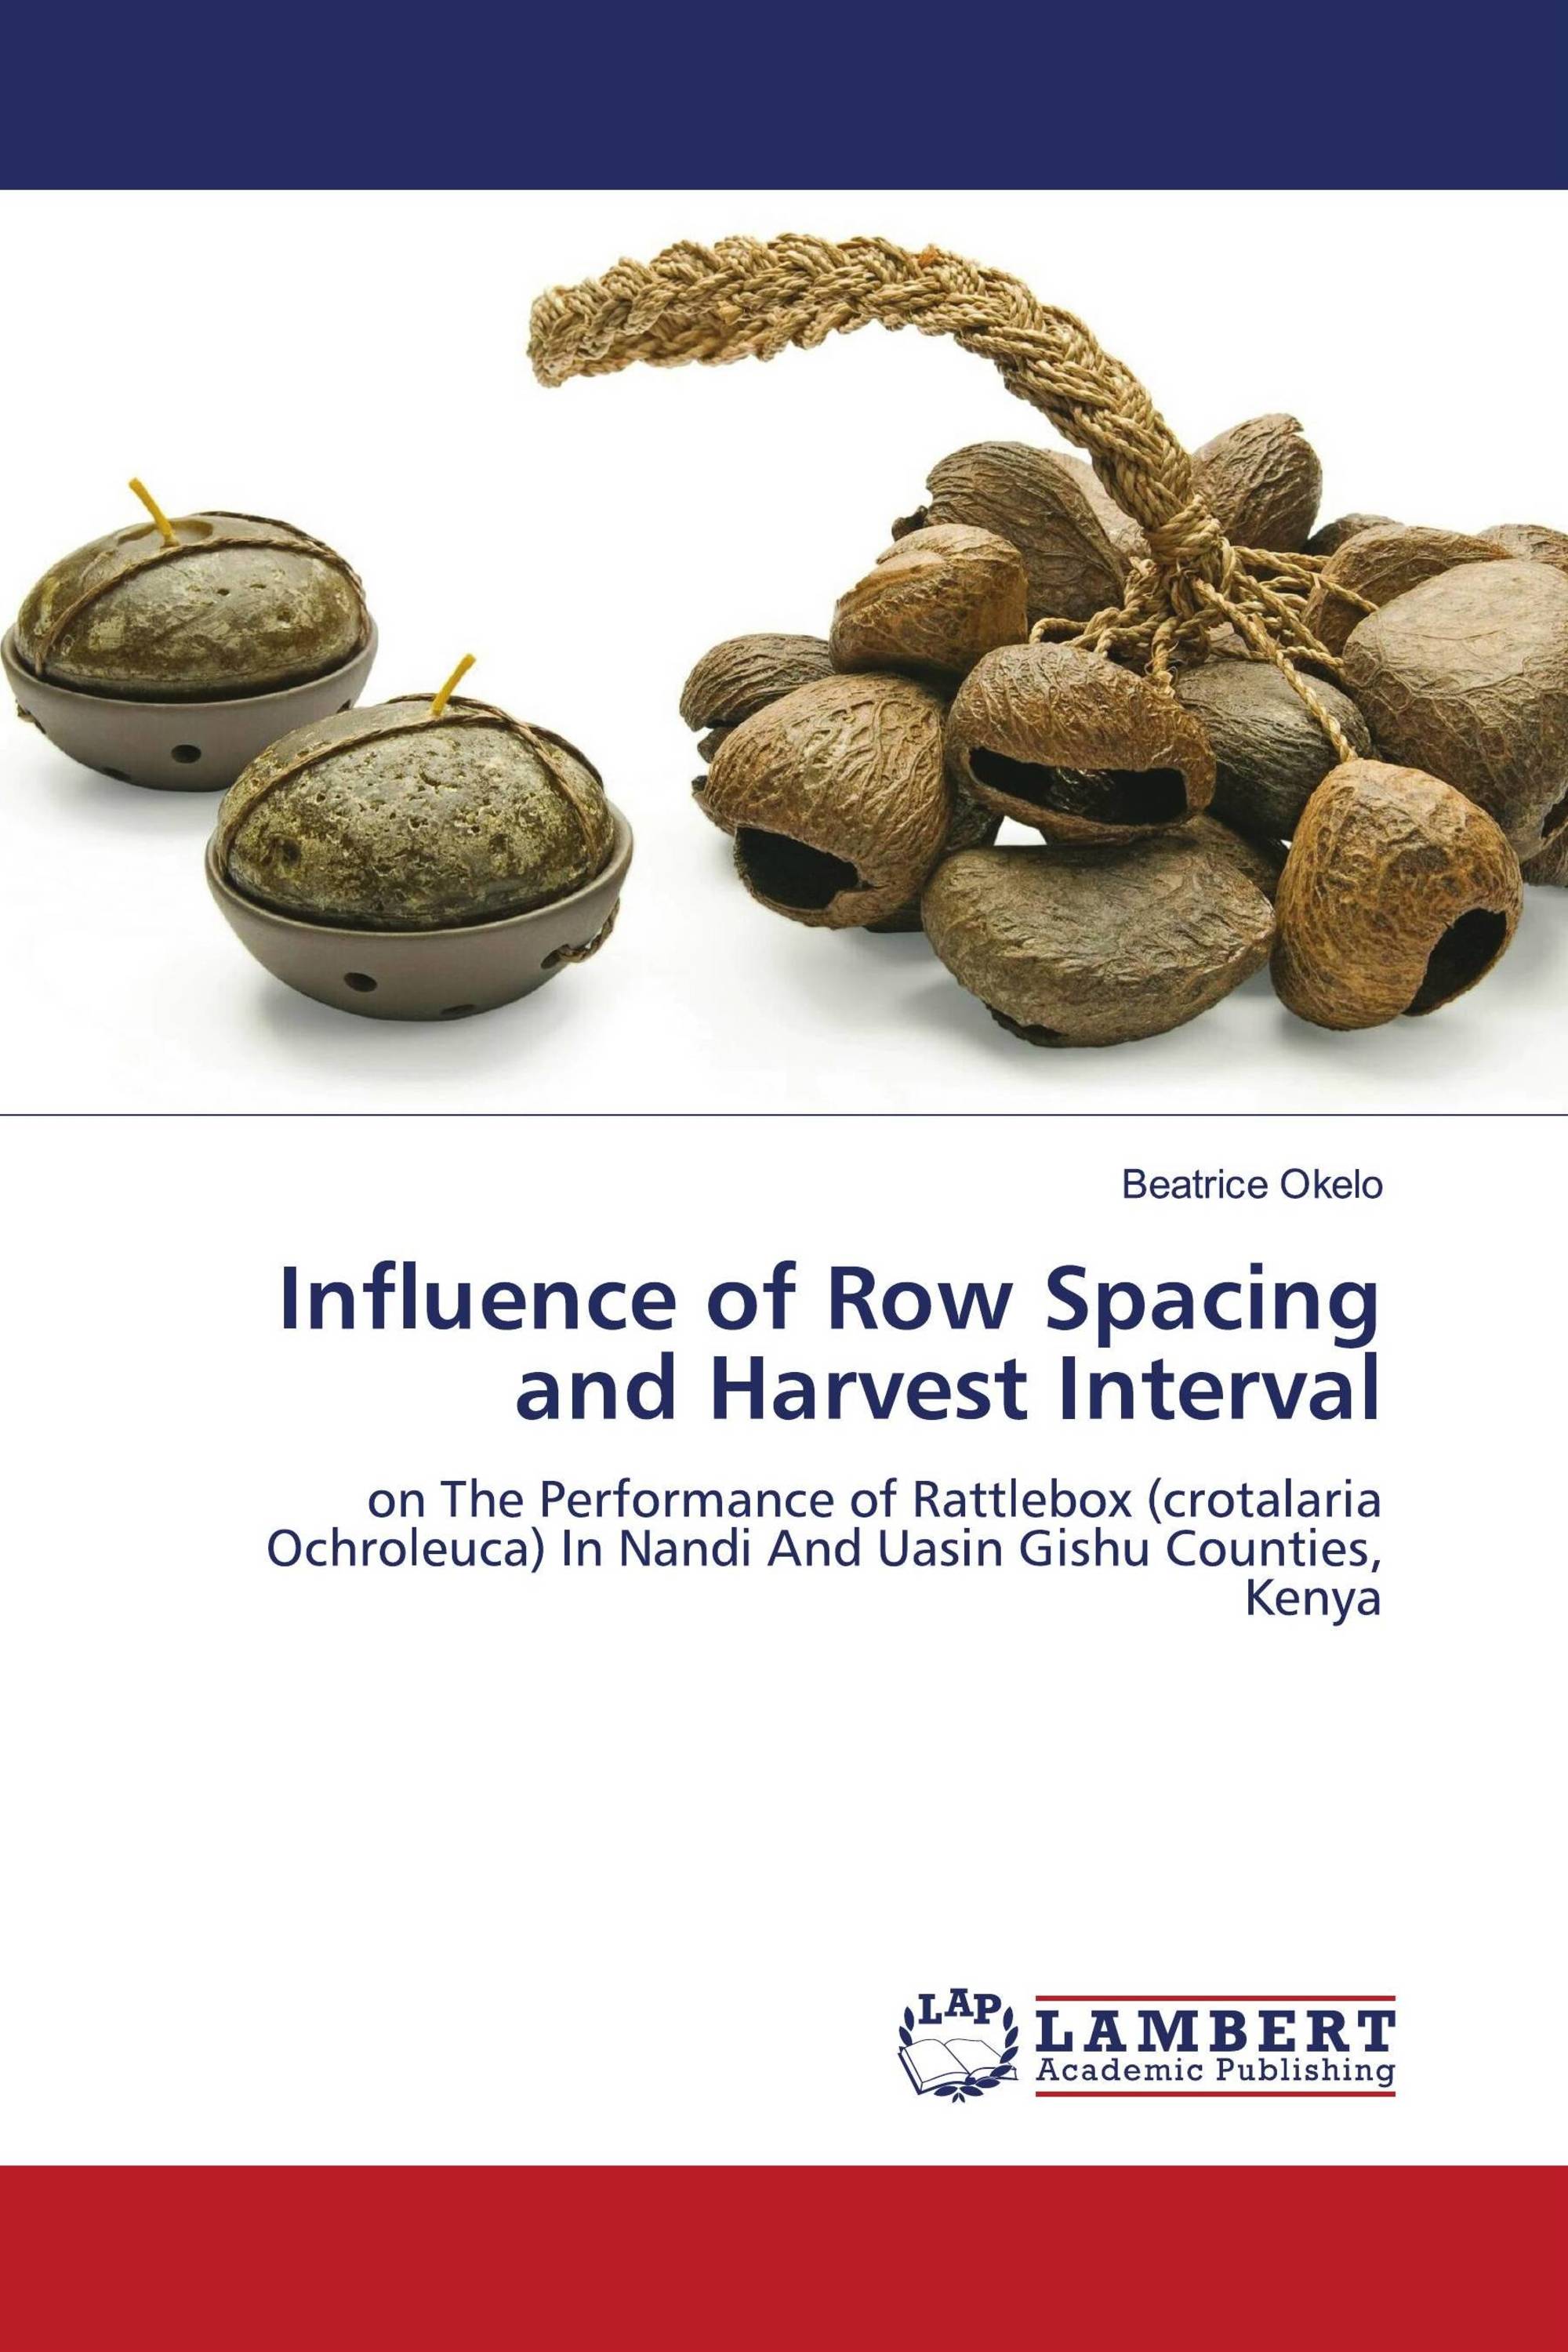 Influence of Row Spacing and Harvest Interval